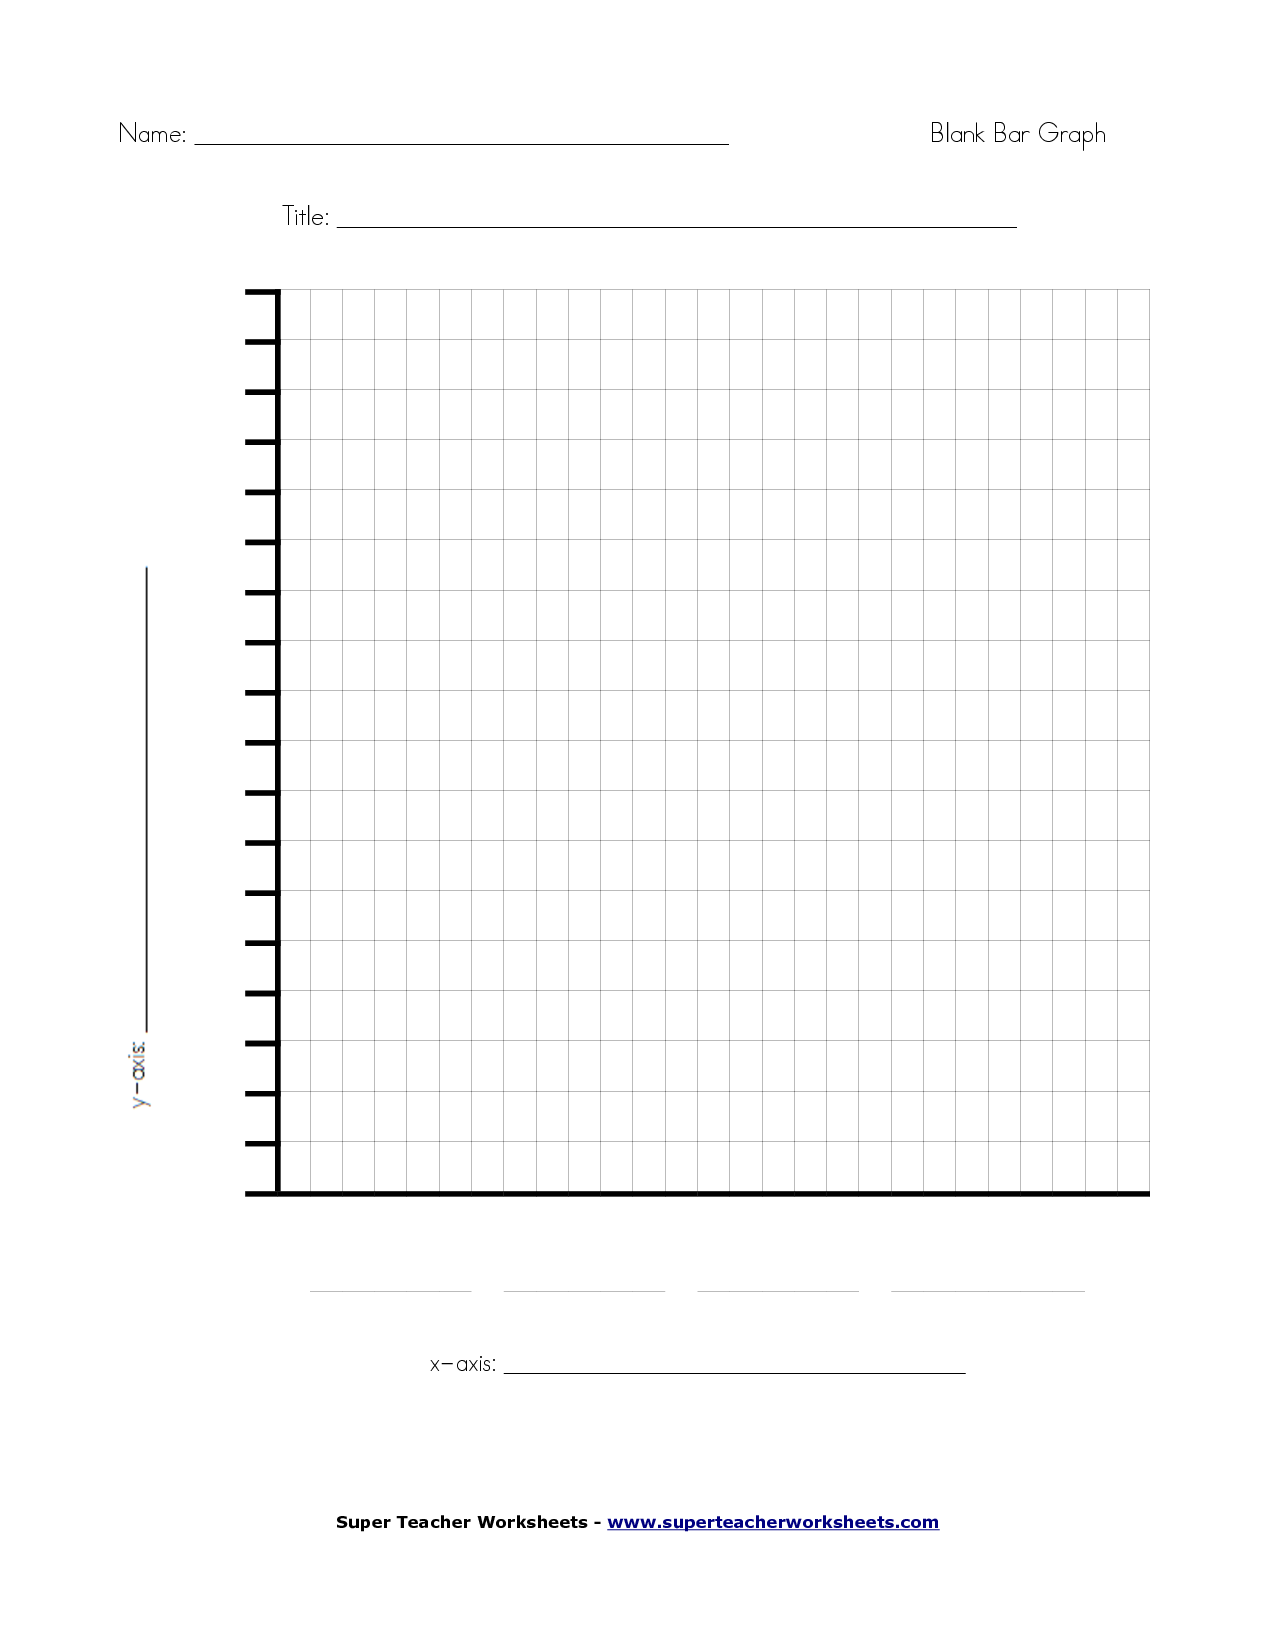 6 Best Images of Fill In Blank Printable Graph Blank Bar Graph